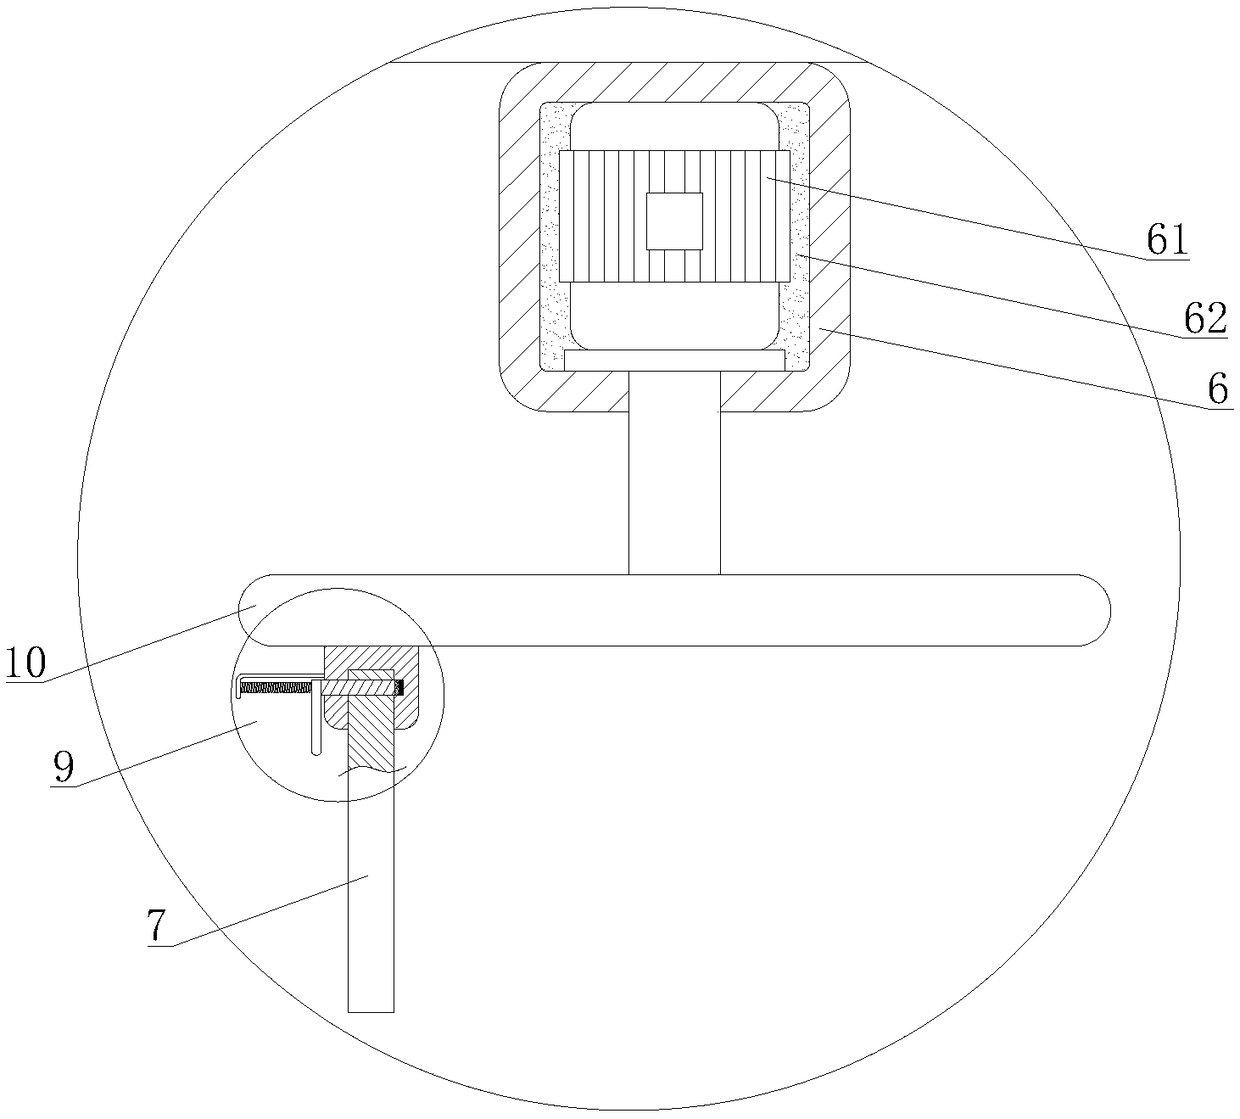 Circling moxibustion assisting device and method